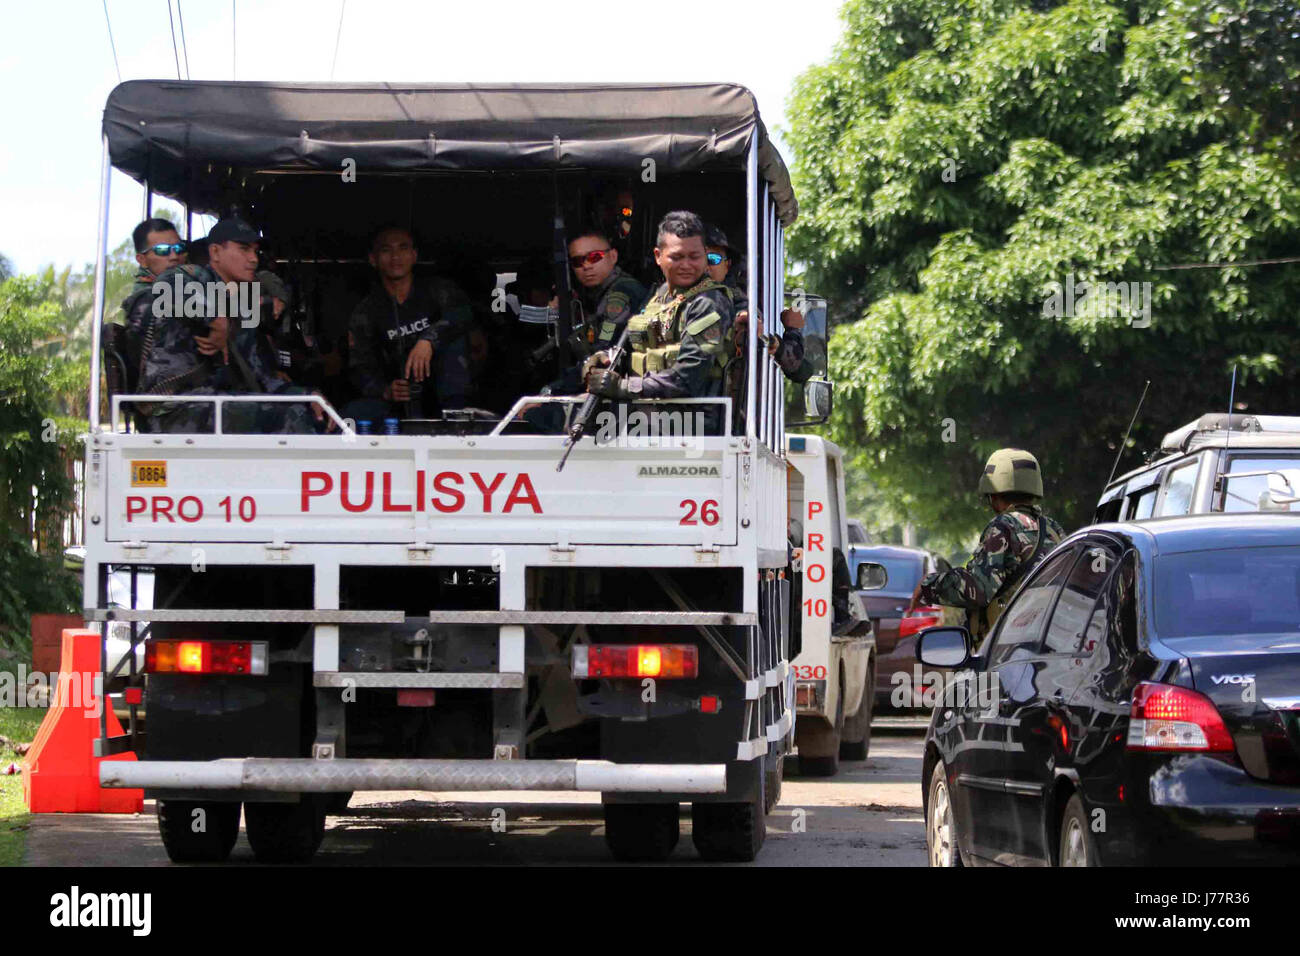 (170524) -- LANAO DEL SUR, May 24, 2017 (Xinhua) -- Members of the Philippine National Police-Special Action Force (PNP-SAF) are deployed at a checkpoint in Lanao Del Sur Province, the Philippines, May 24, 2017. Philippine President Rodrigo Duterte said Wednesday he is mulling placing the Visayas region in the central Philippines under martial law after declaring Mindanao under martial law. (Xinhua/Stringer) (zy) Stock Photo